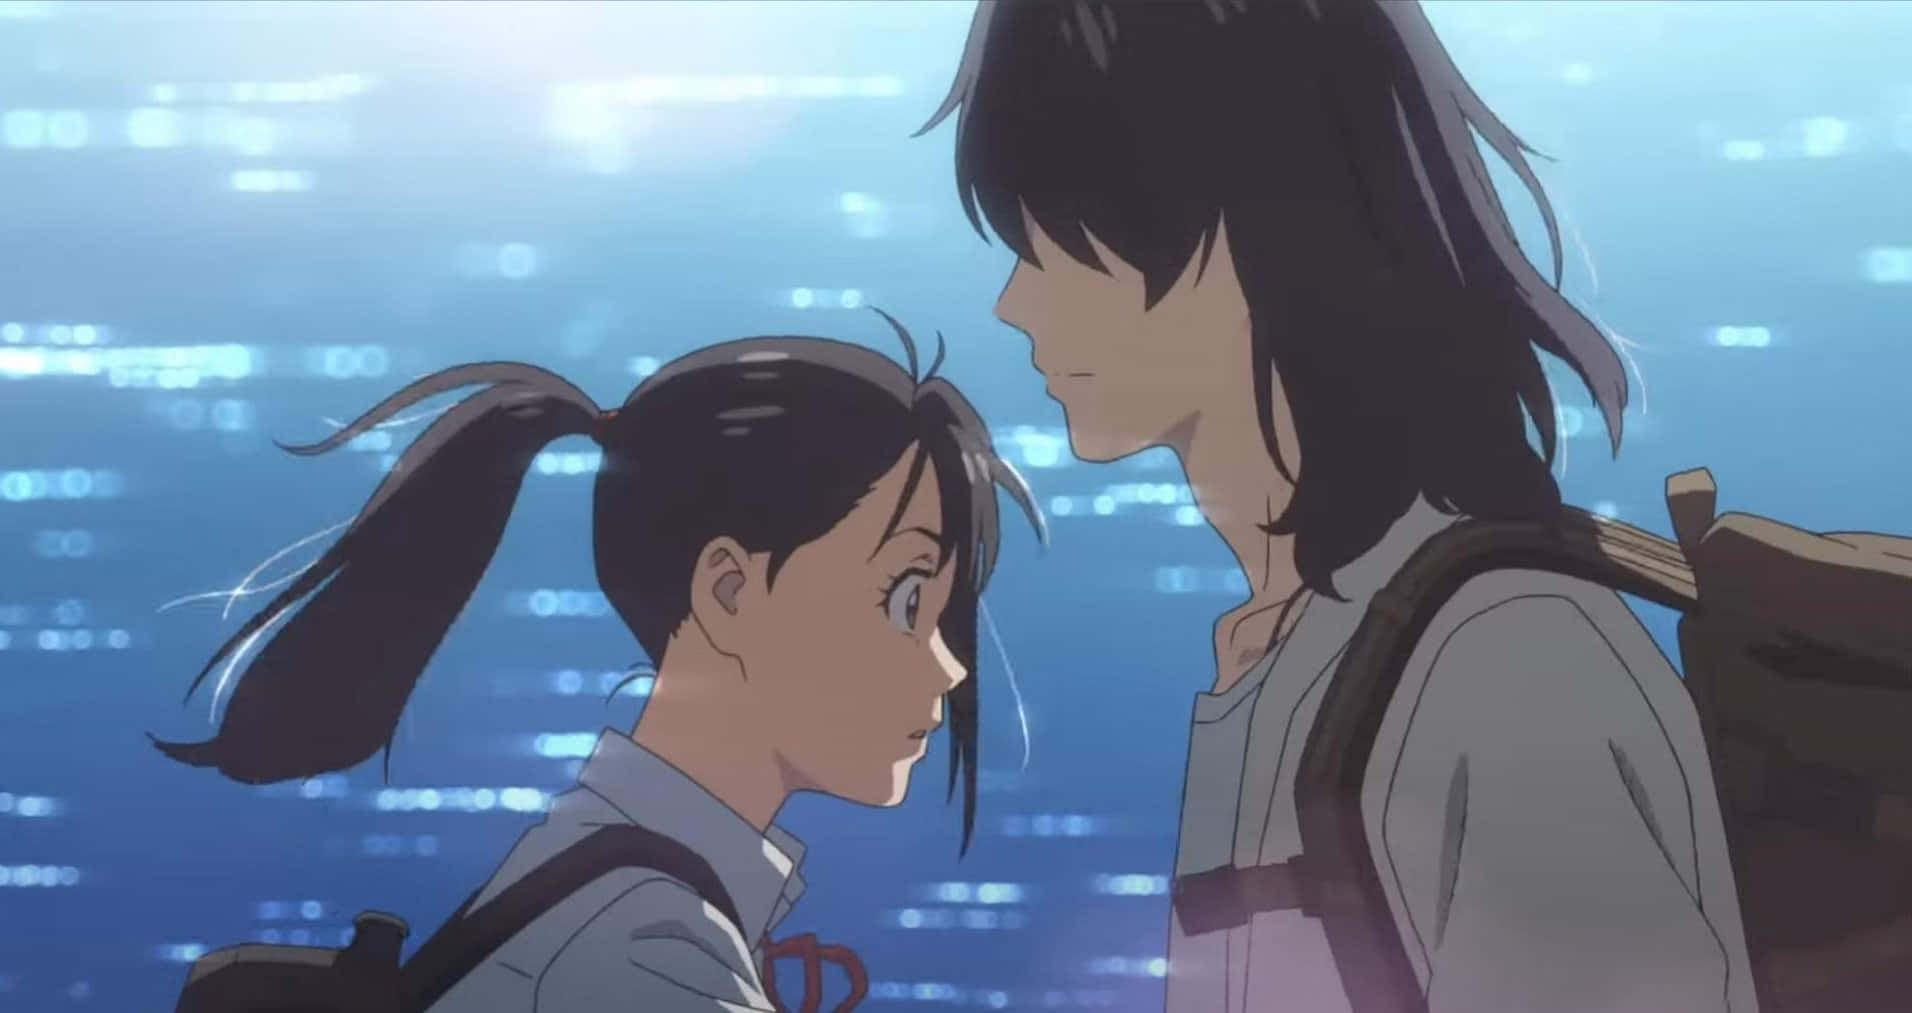 Enjoy the beautiful bond between young love and the magic of summer in the profound anime, Weathering With You